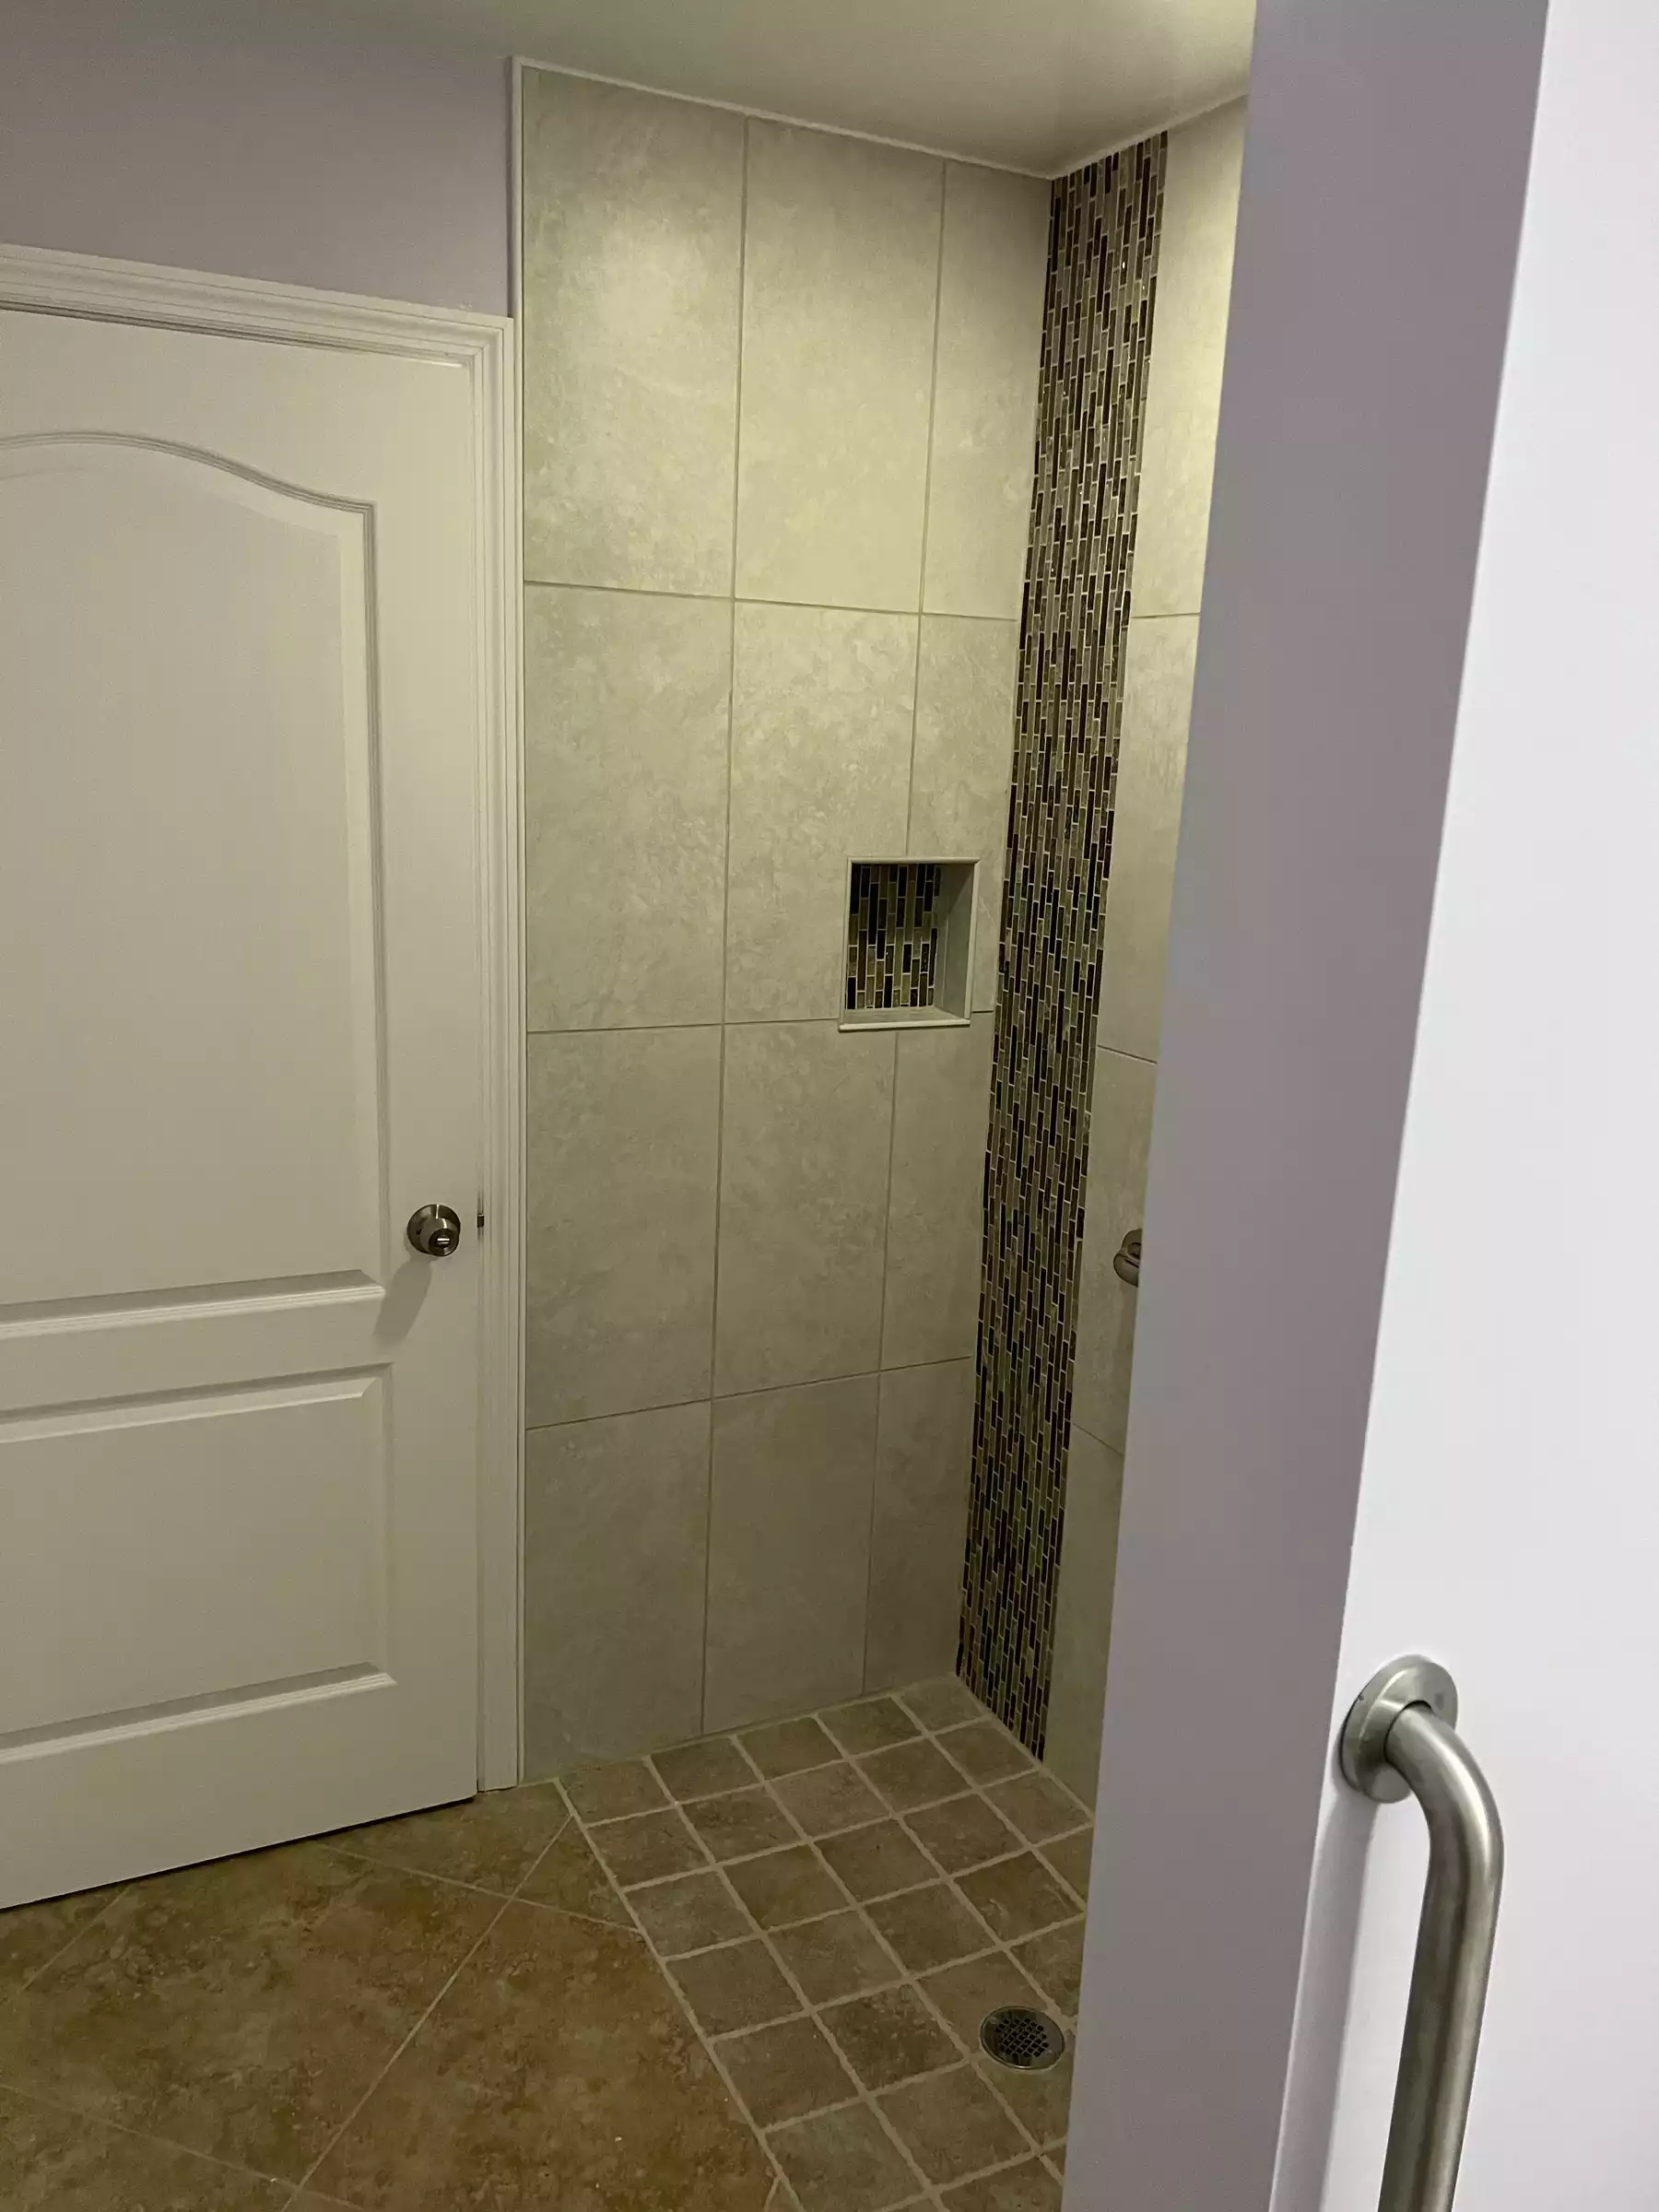 Nice neutral wall tile and a beautiful waterfall scene in both corners